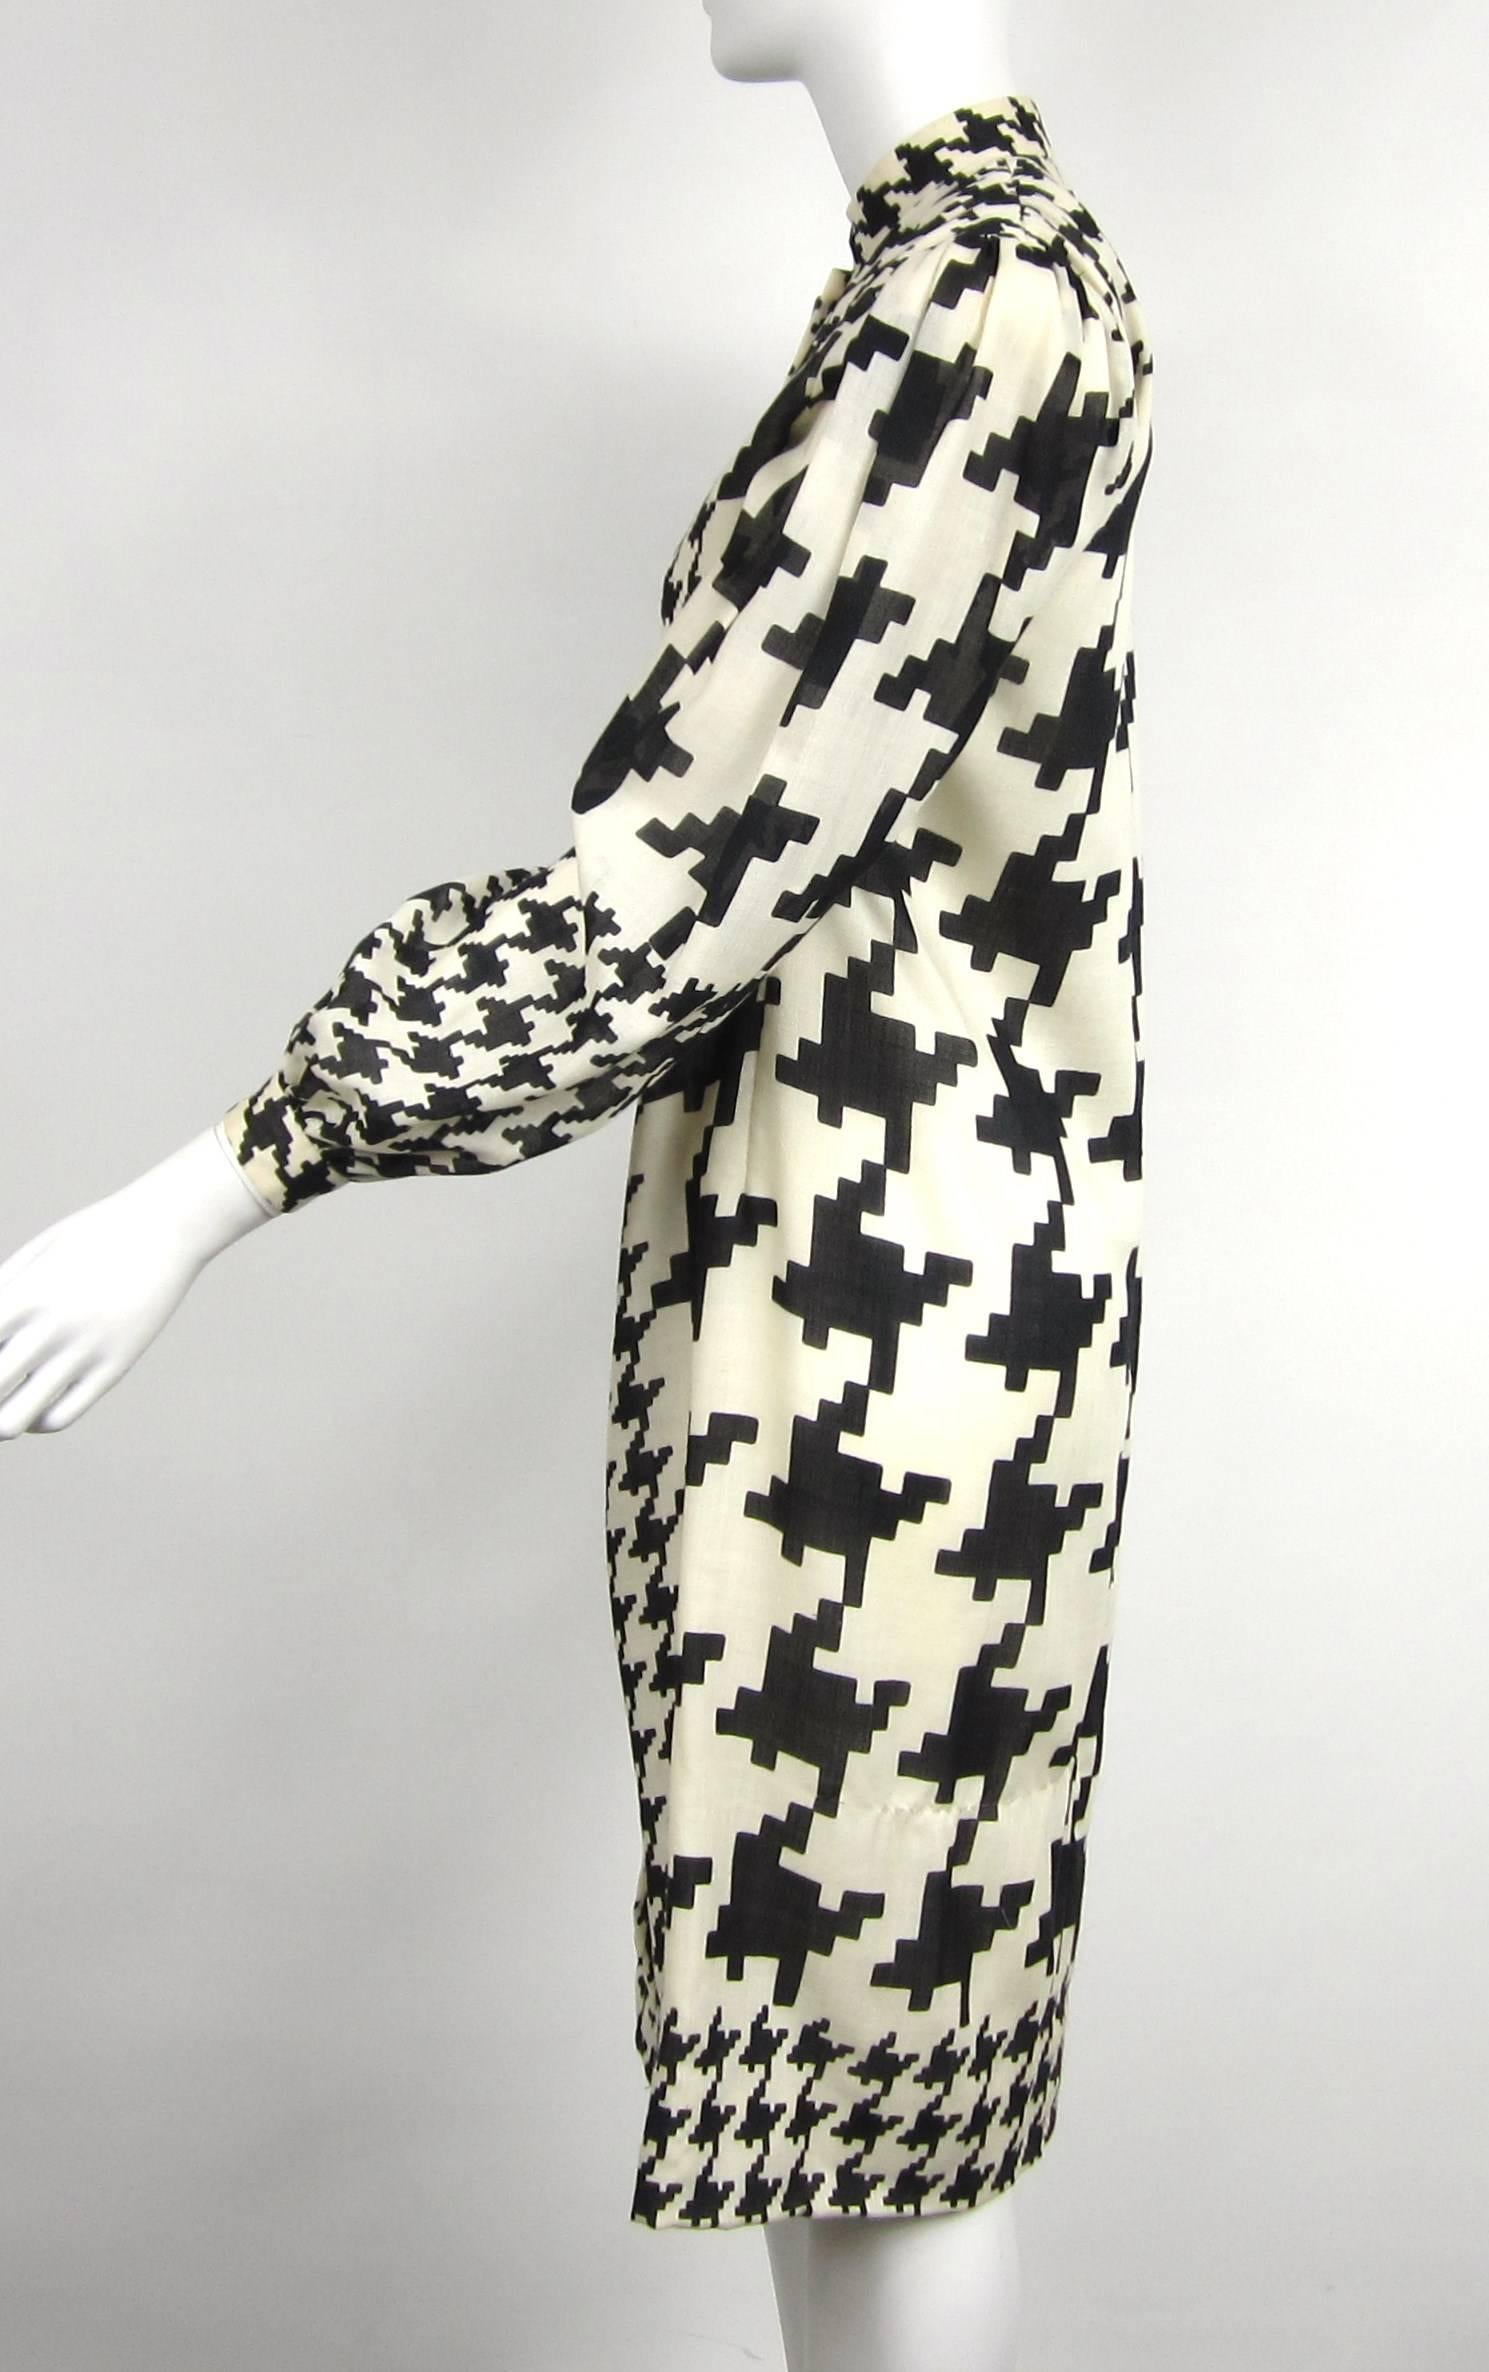 Beige Pauline Trigere Dress Black & White Hounds tooth  For Sale